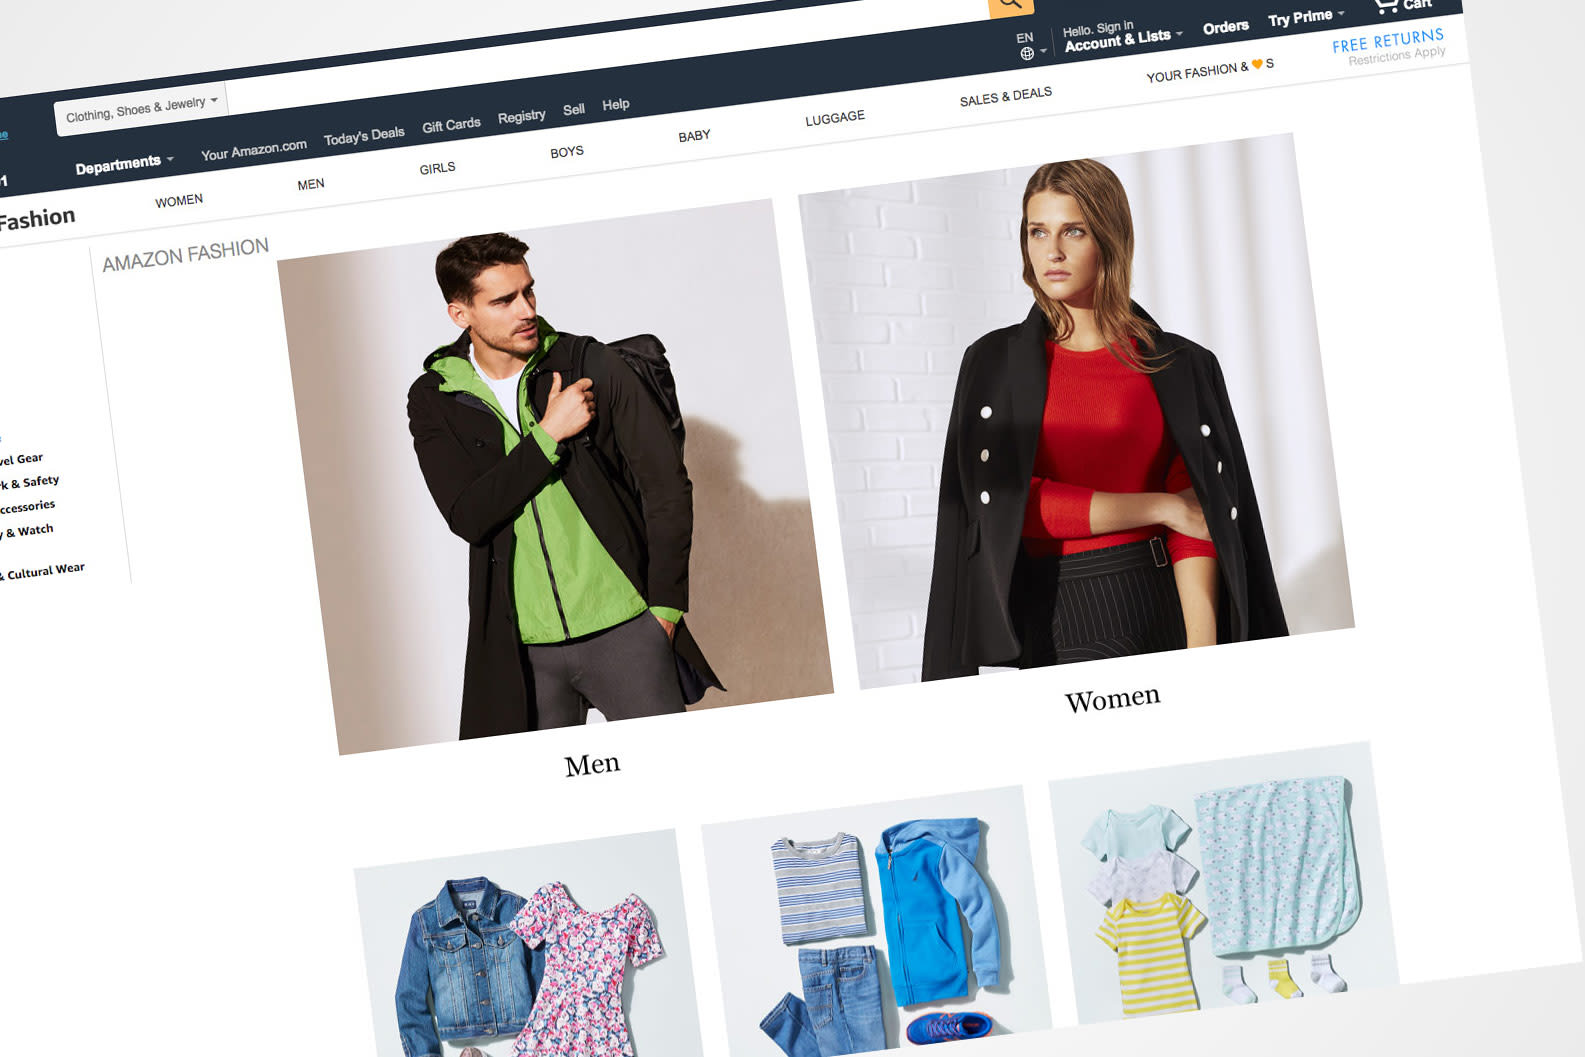 Amazon and Walmart try to boost fashion reputation